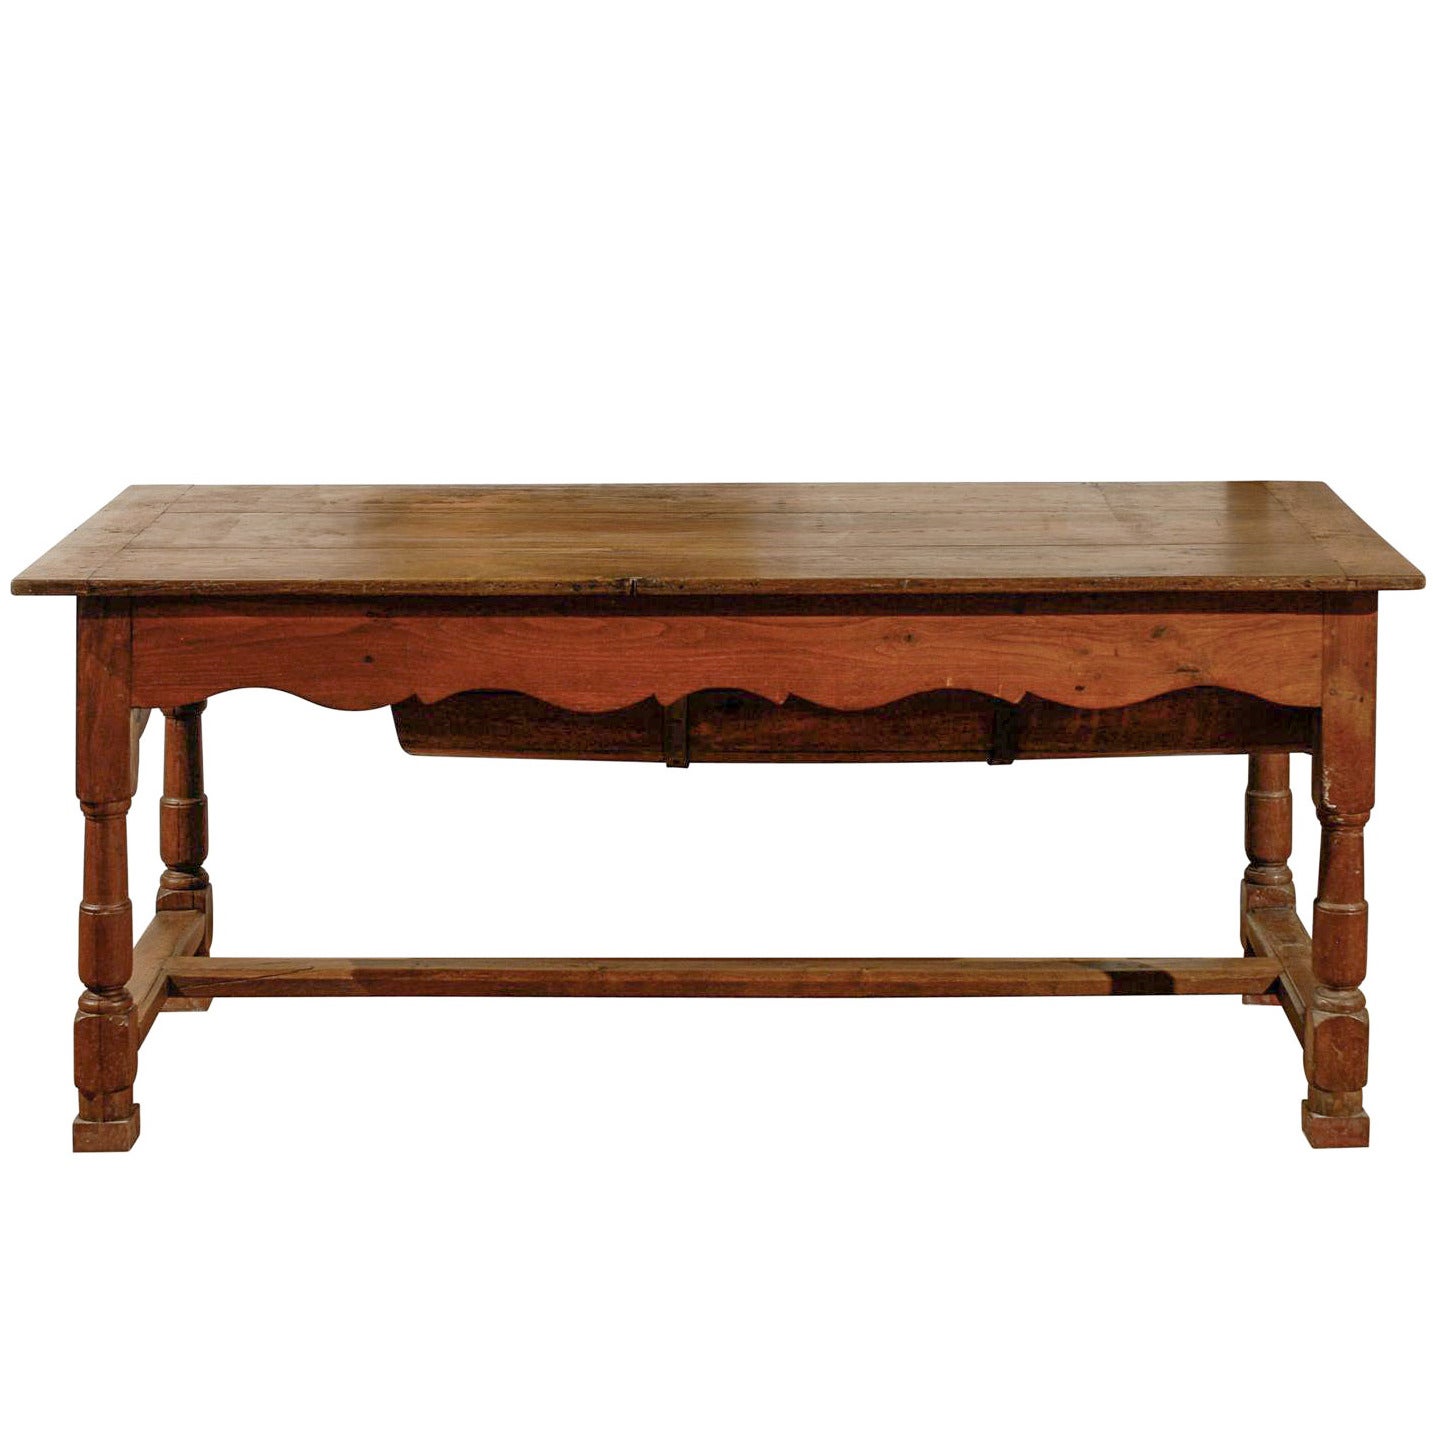 French Wooden Pétrin Table with Original Dough Bin and Baluster Legs, circa 1750 For Sale